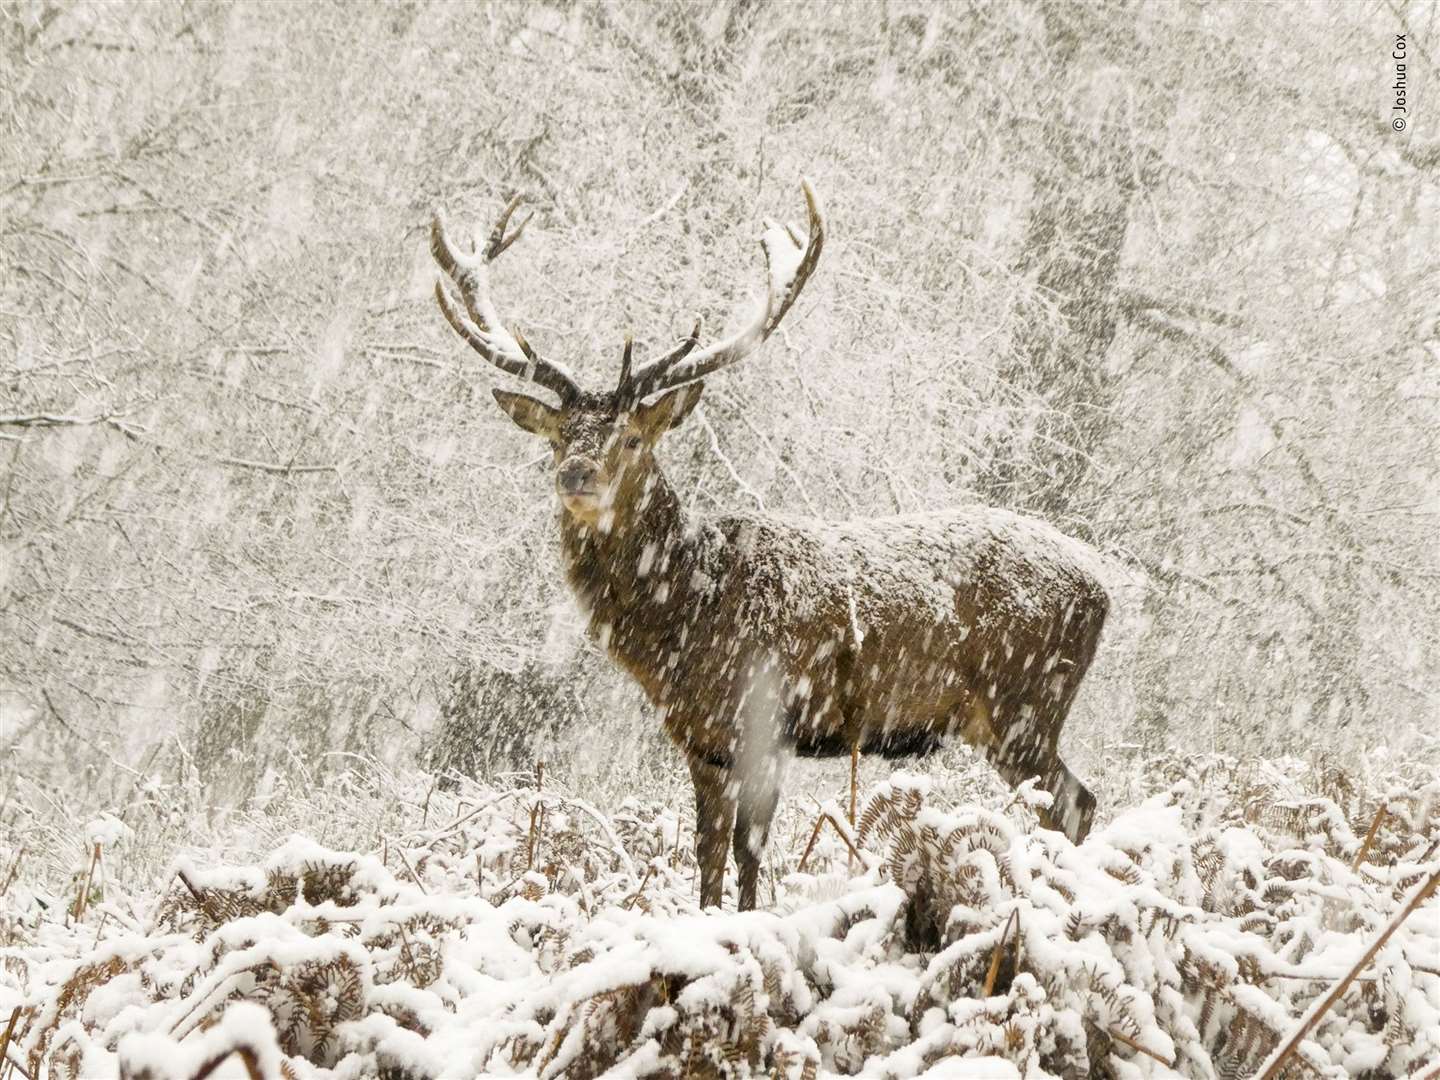 Red deer stag in snow in Richmond Park, London (Joshua Cox/Wildlife Photographer of the Year/PA)